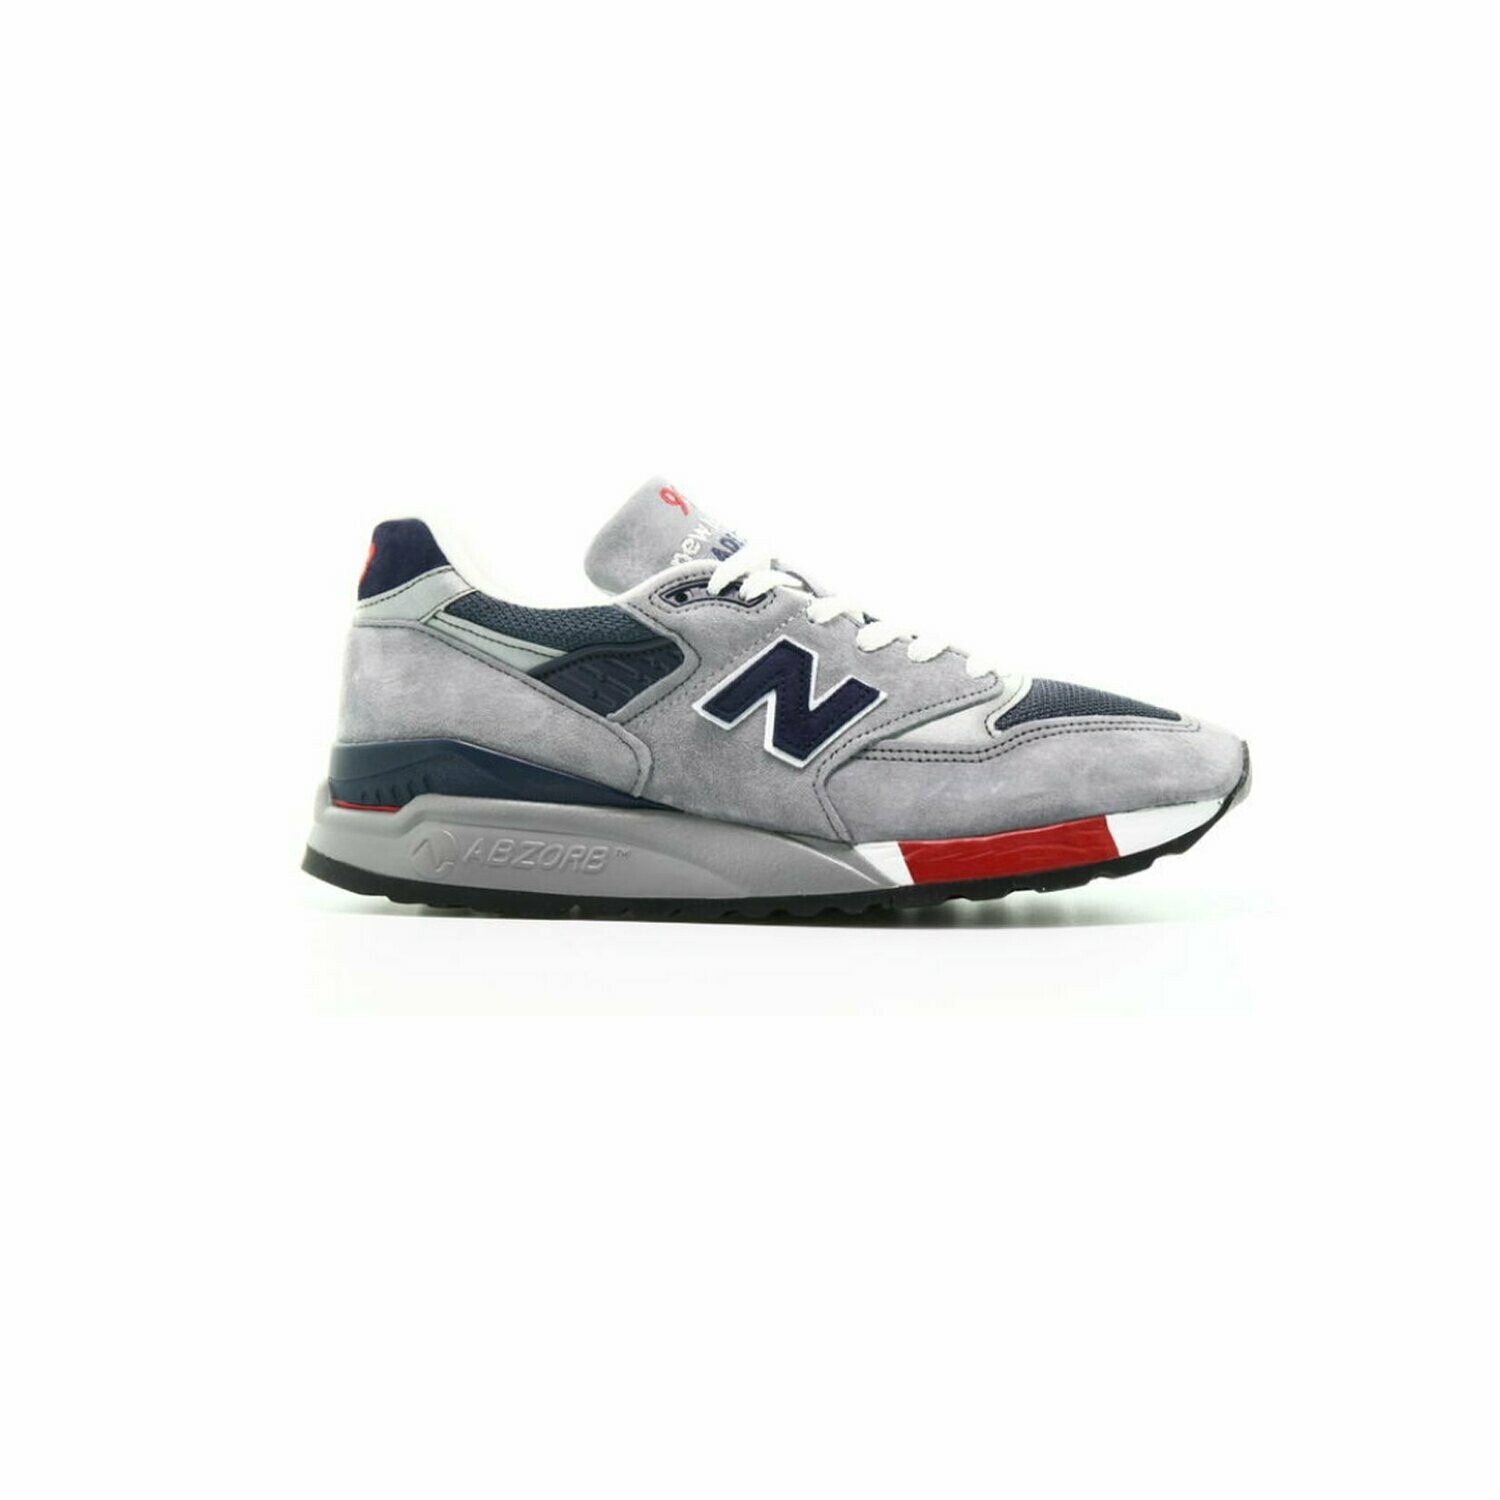 998 made in the usa